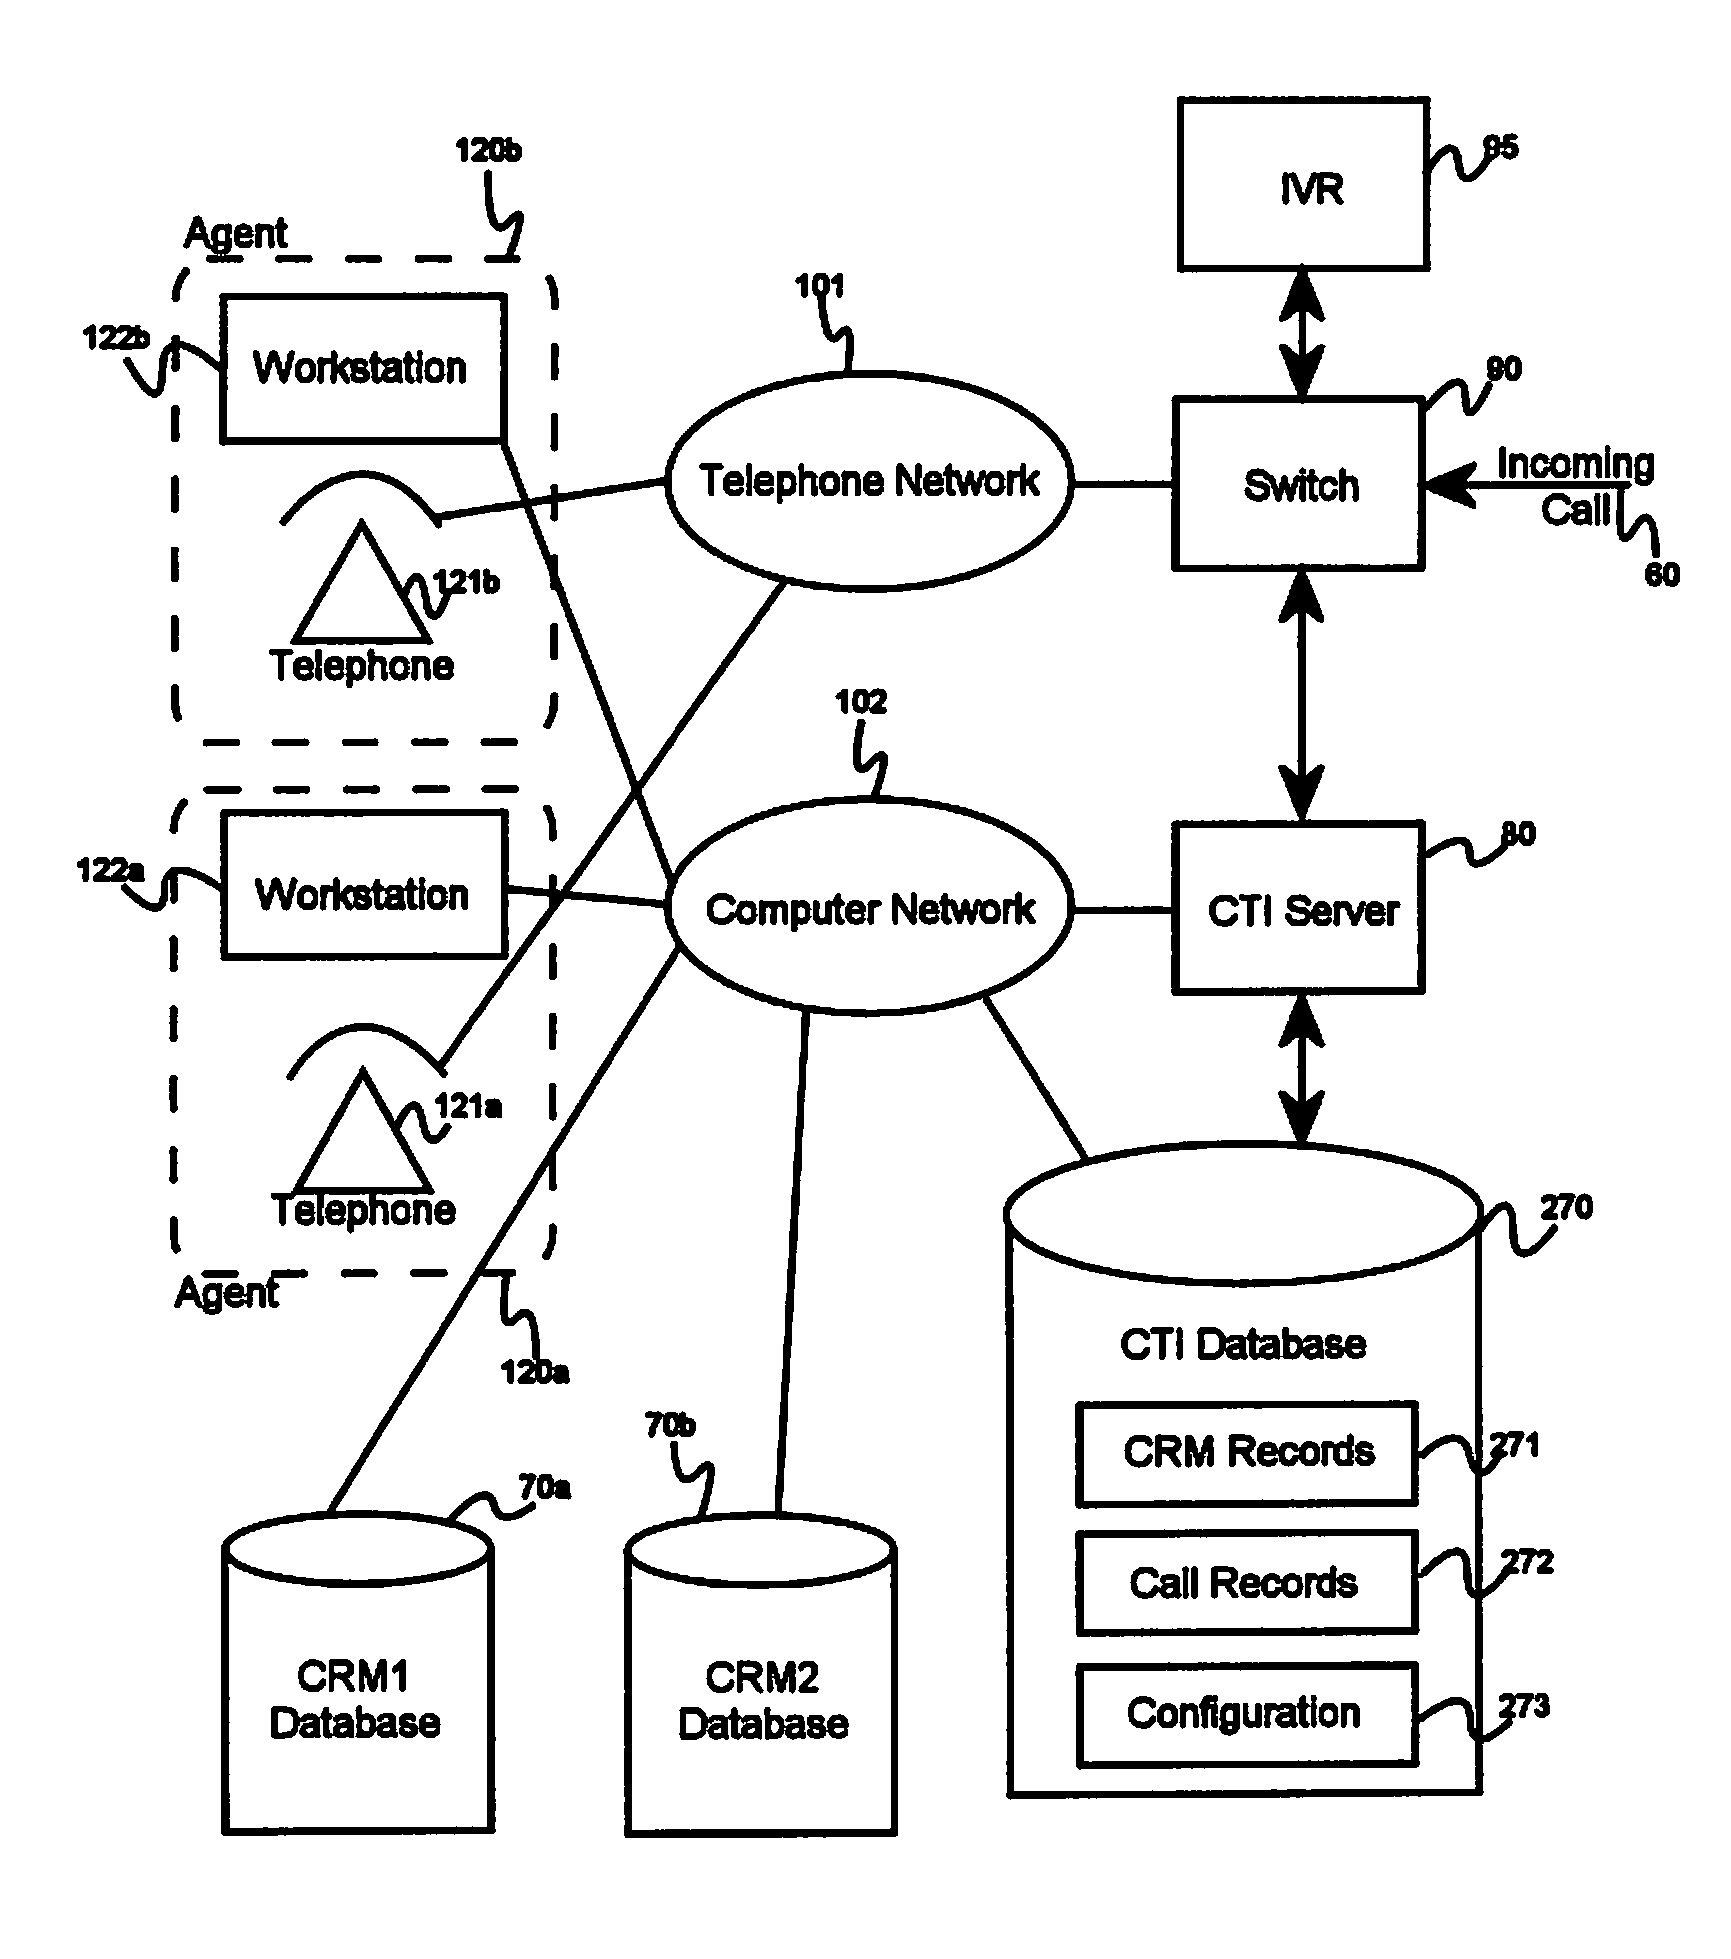 Method and apparatus for operating a contact center system